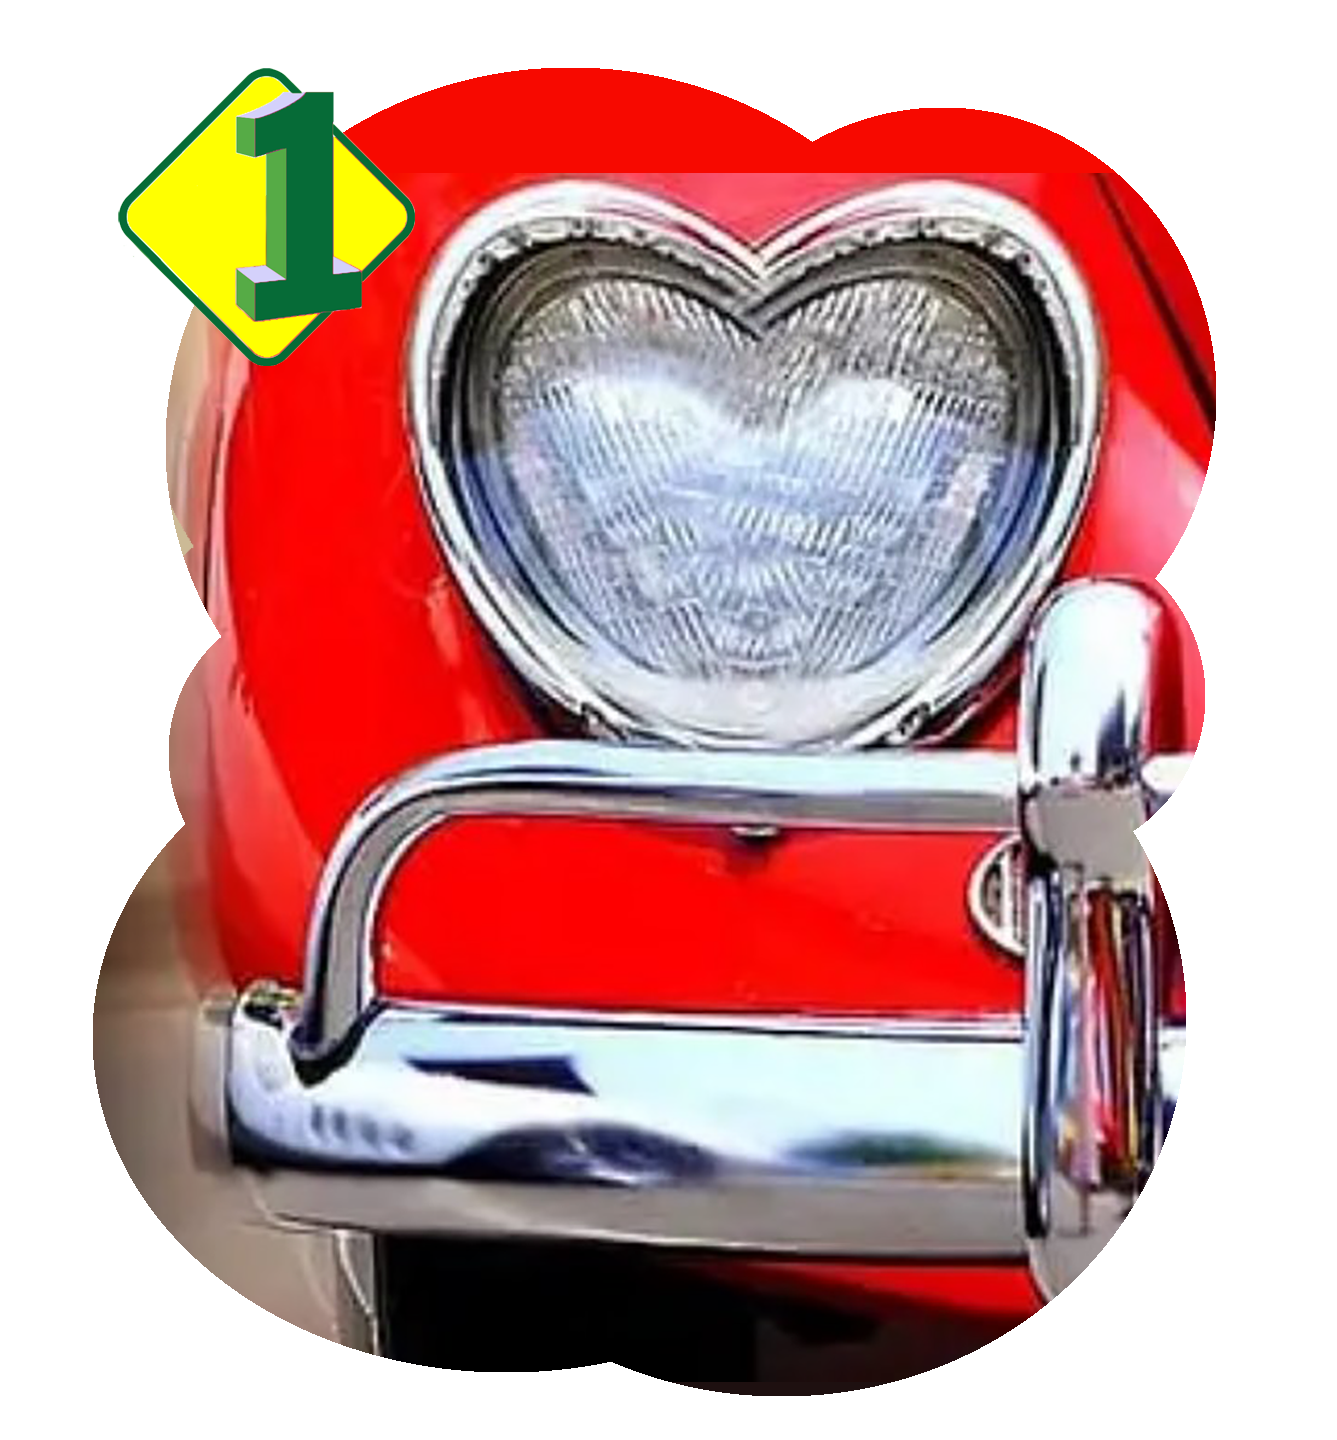 heart-shaped headlight for Valentine's Day.